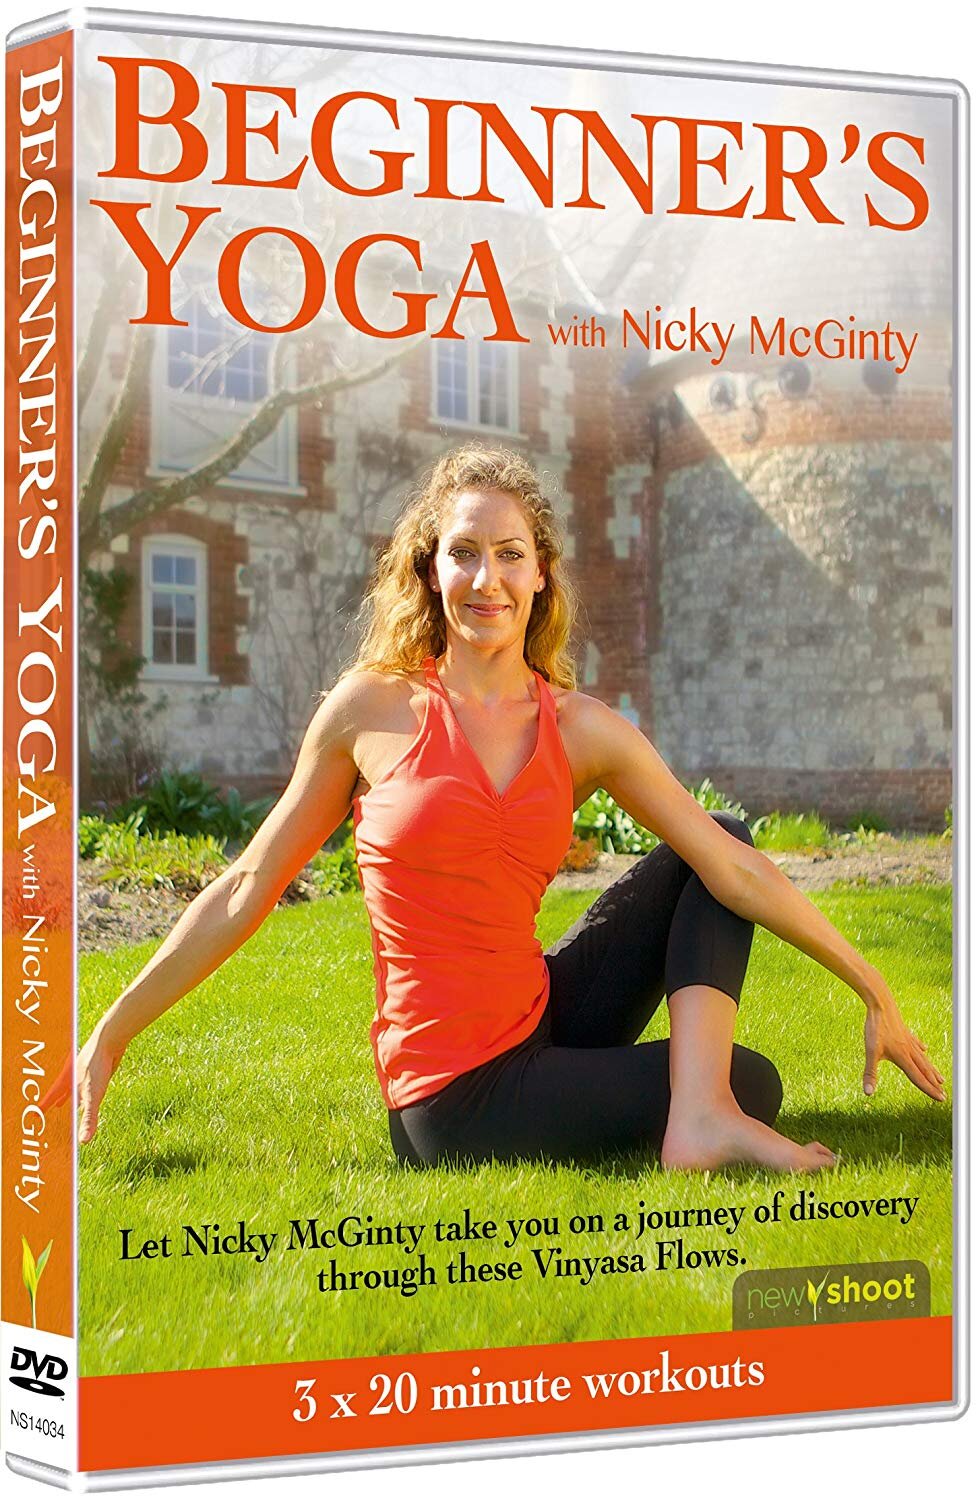 Beginner's Yoga DVD with Nicky McGinty